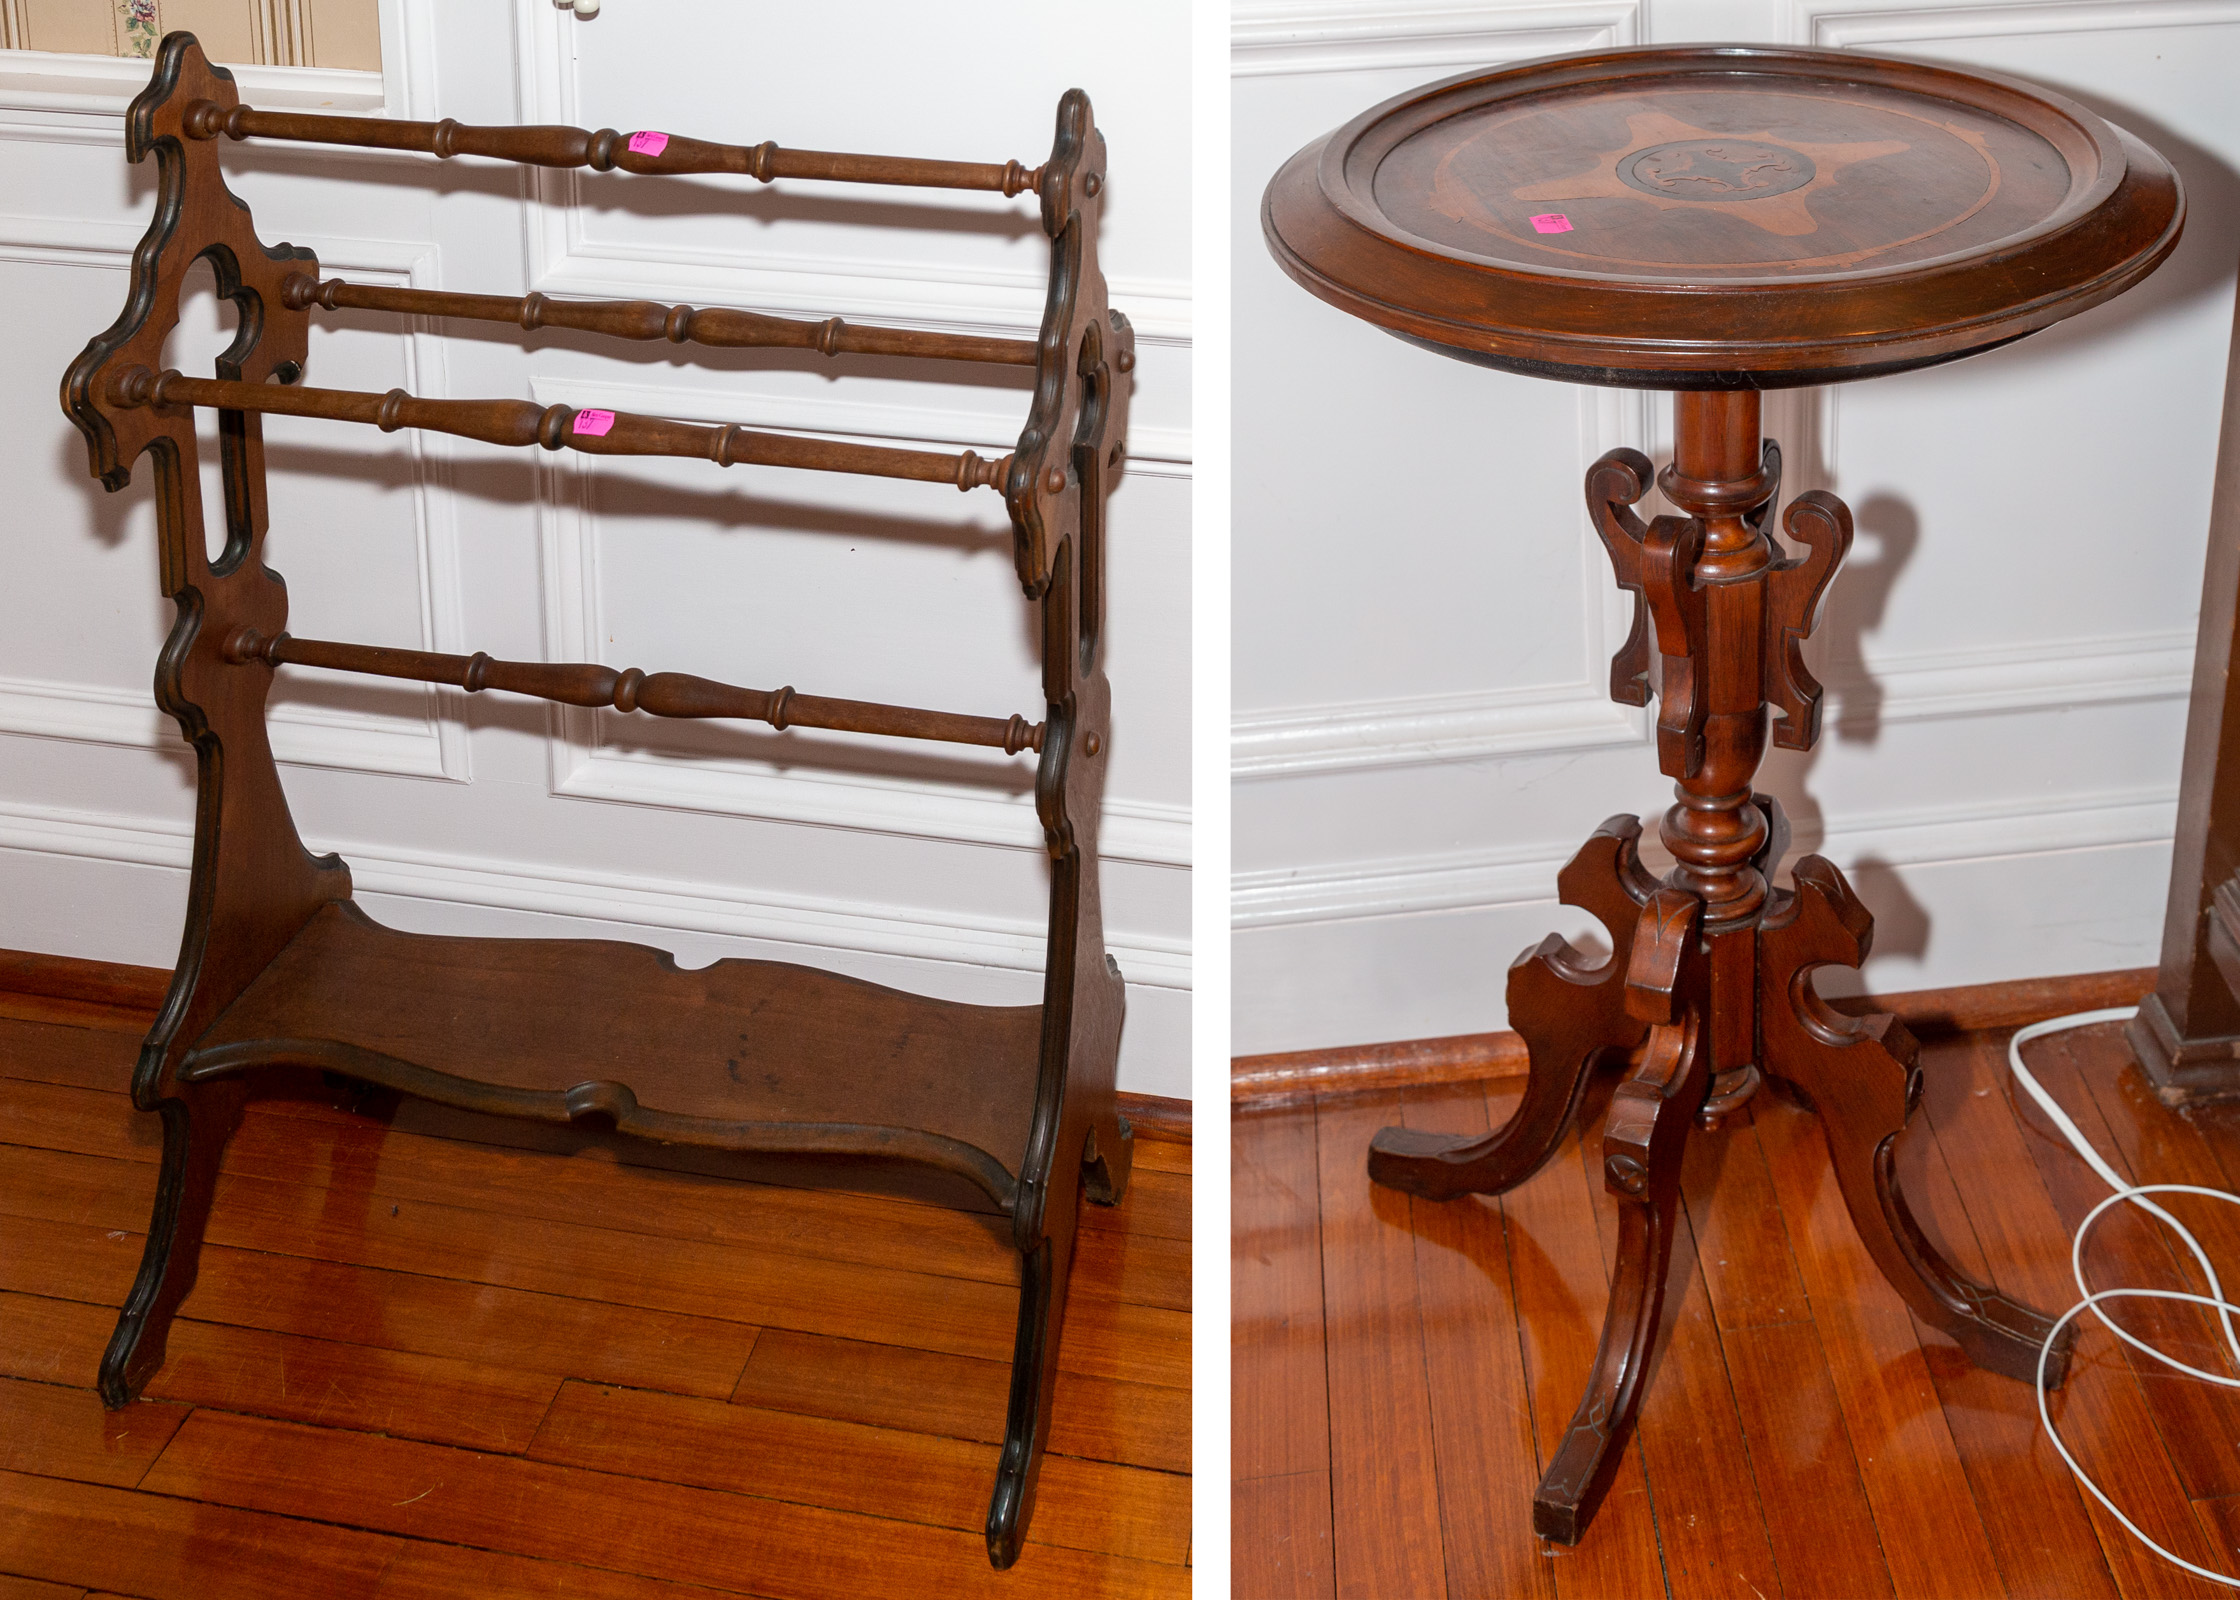 TWO PIECES OF VICTORIAN FURNITURE